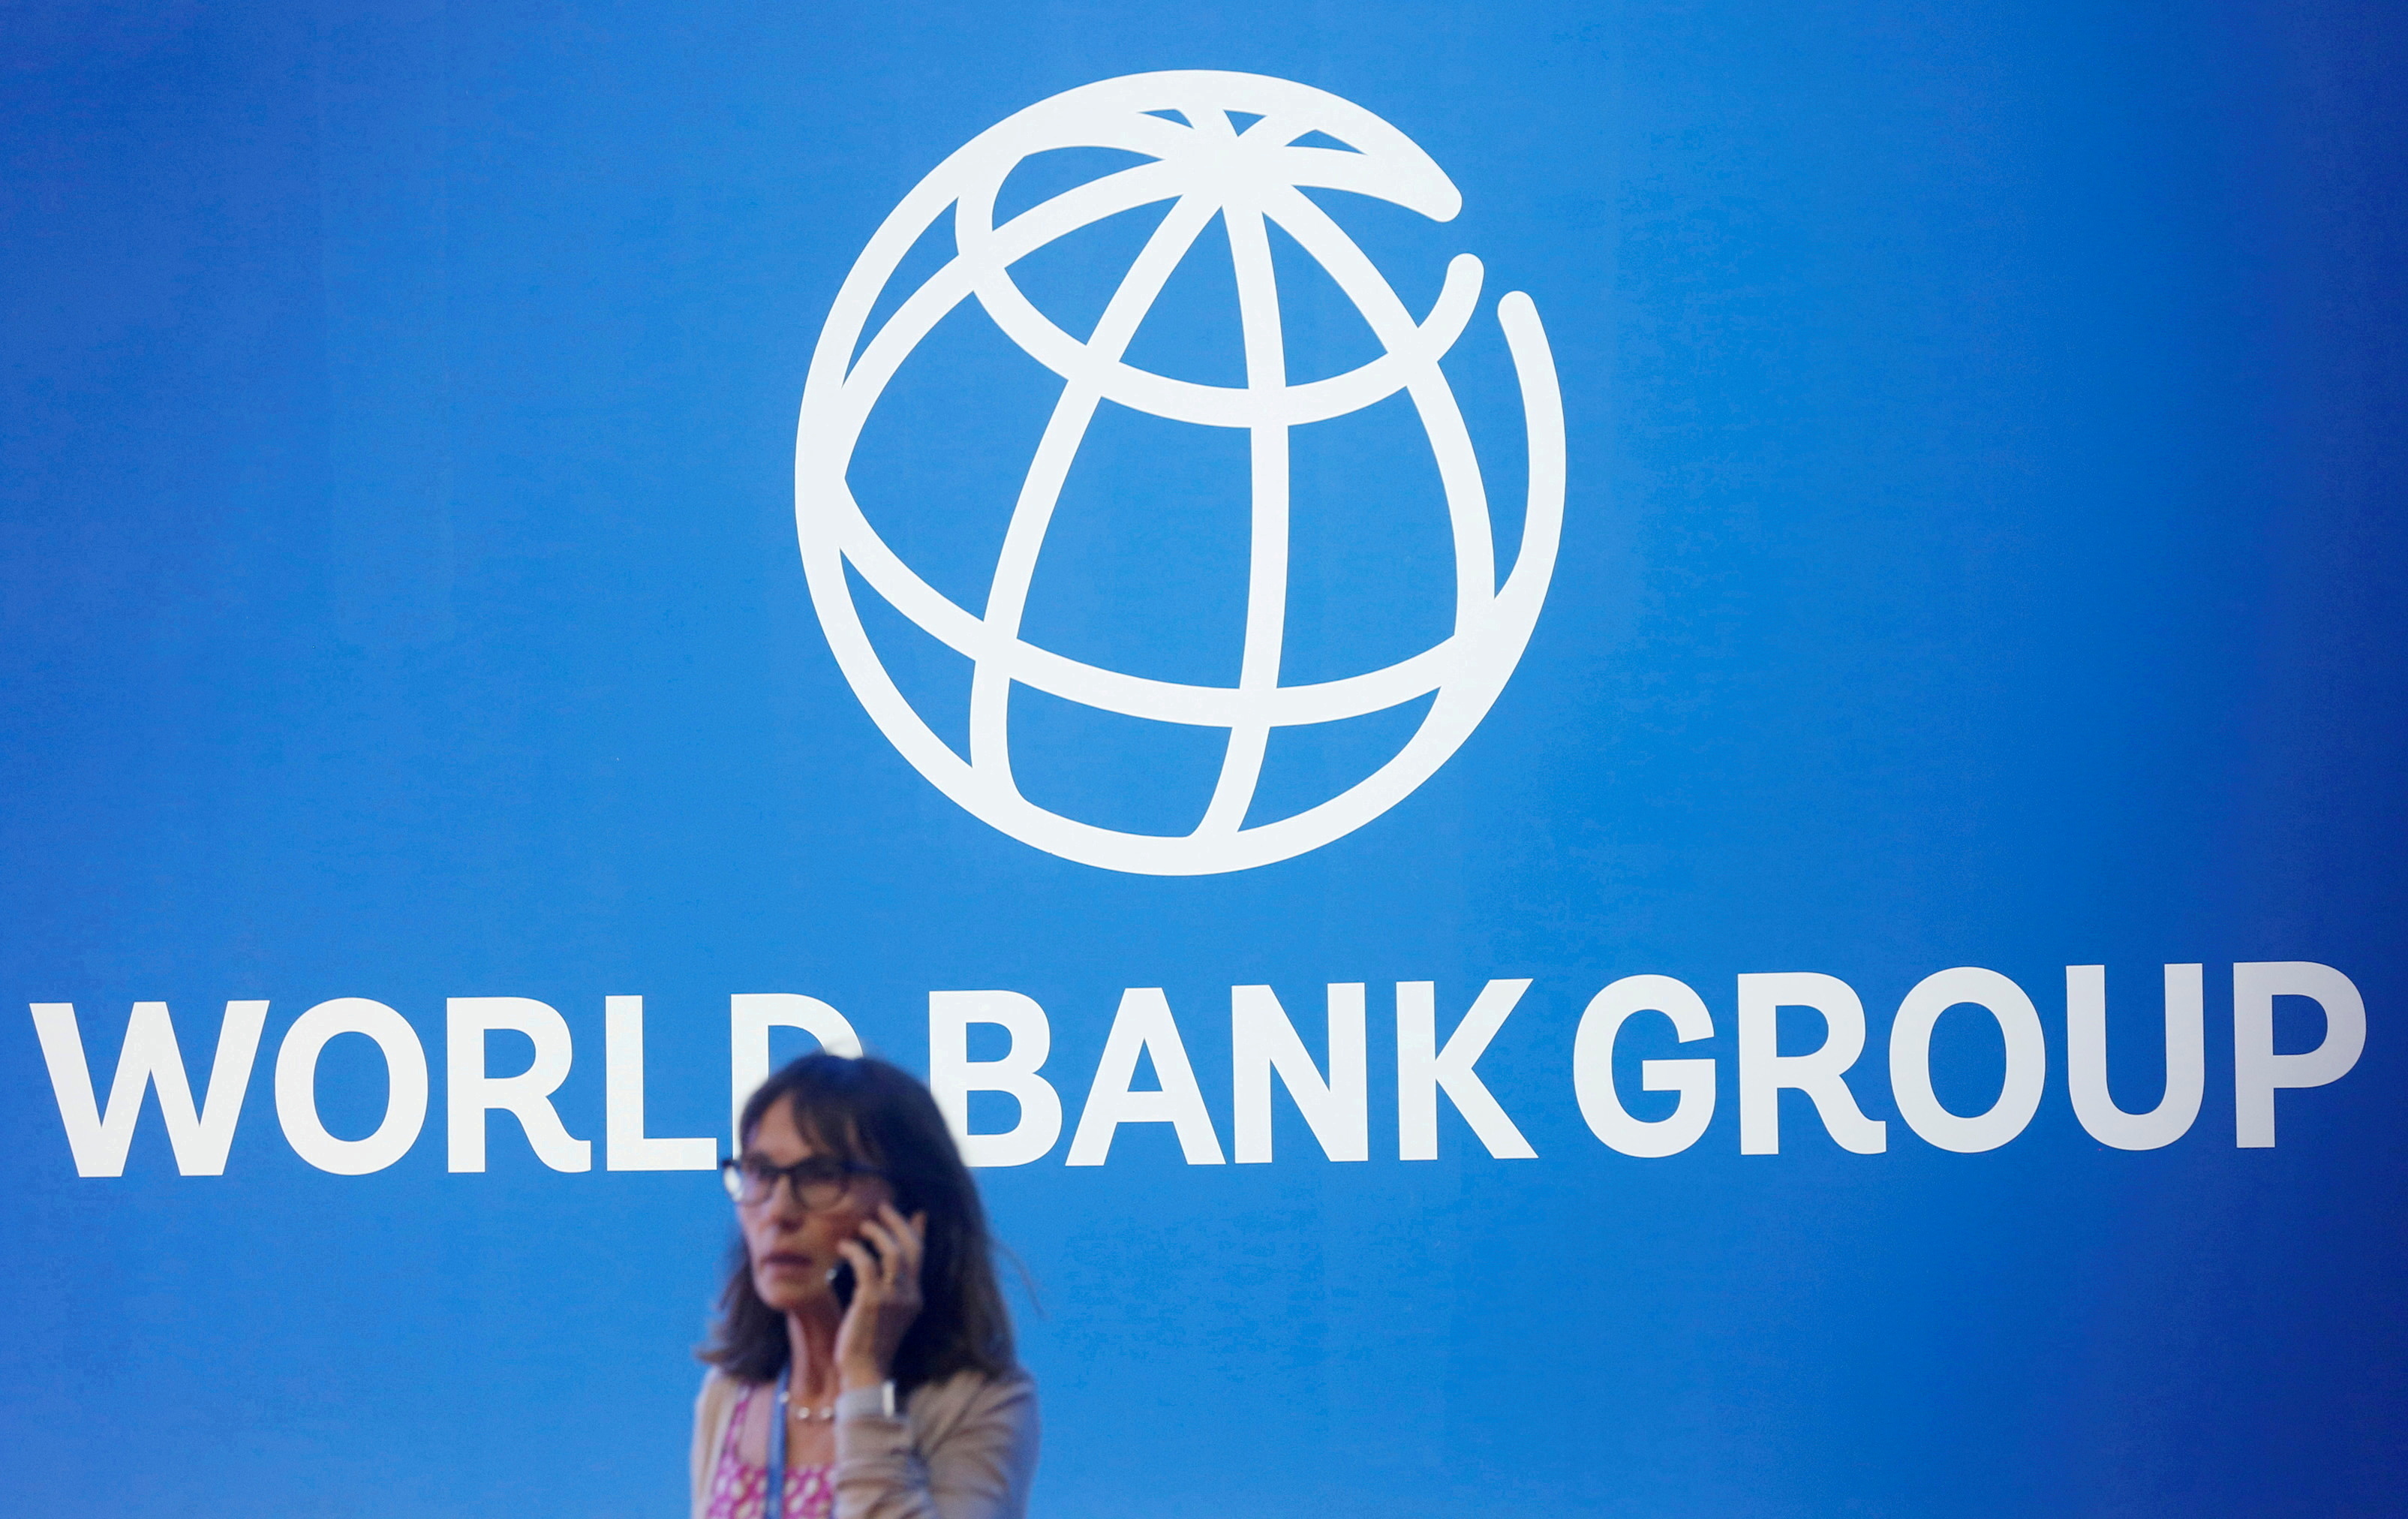 A participant stands near a logo of World Bank at the International Monetary Fund - World Bank Annual Meeting 2018 in Nusa Dua, Bali, Indonesia, October 12, 2018. REUTERS/Johannes P. Christo/File Photo